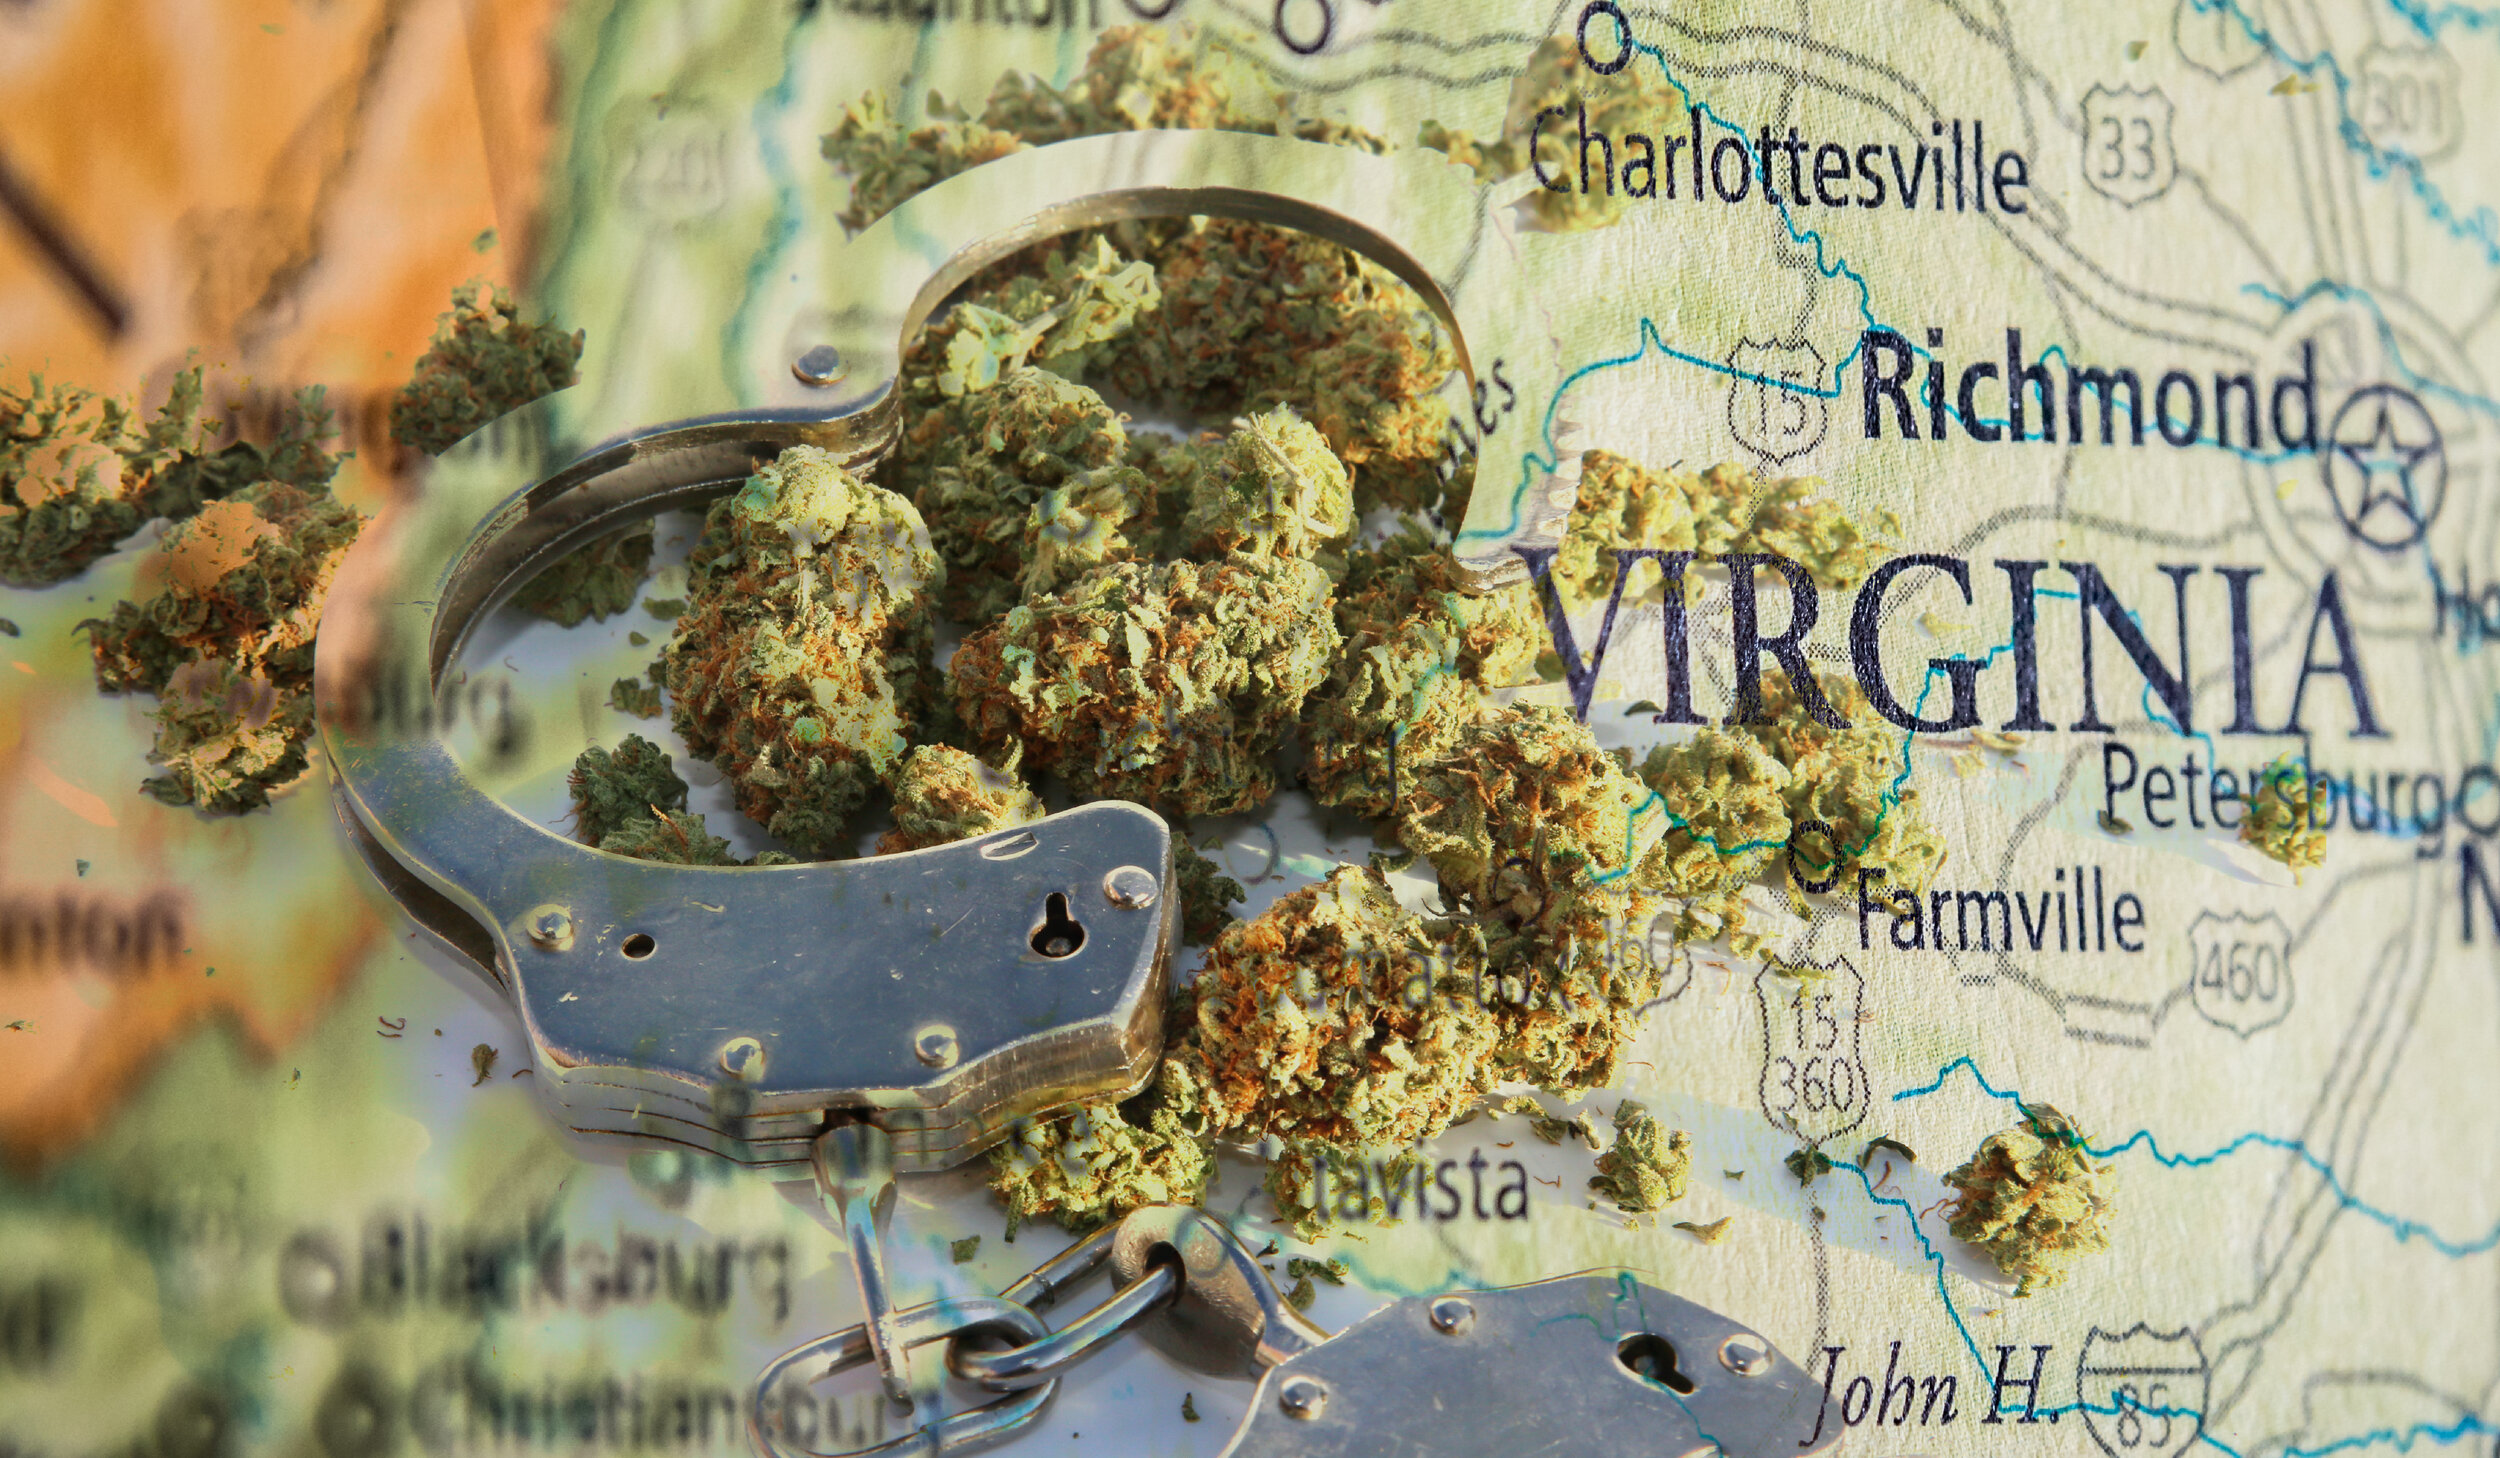 Virginia Police Report Shows Large Drop In Cannabis Arrests For 2020, But Omits Breakdown By Race